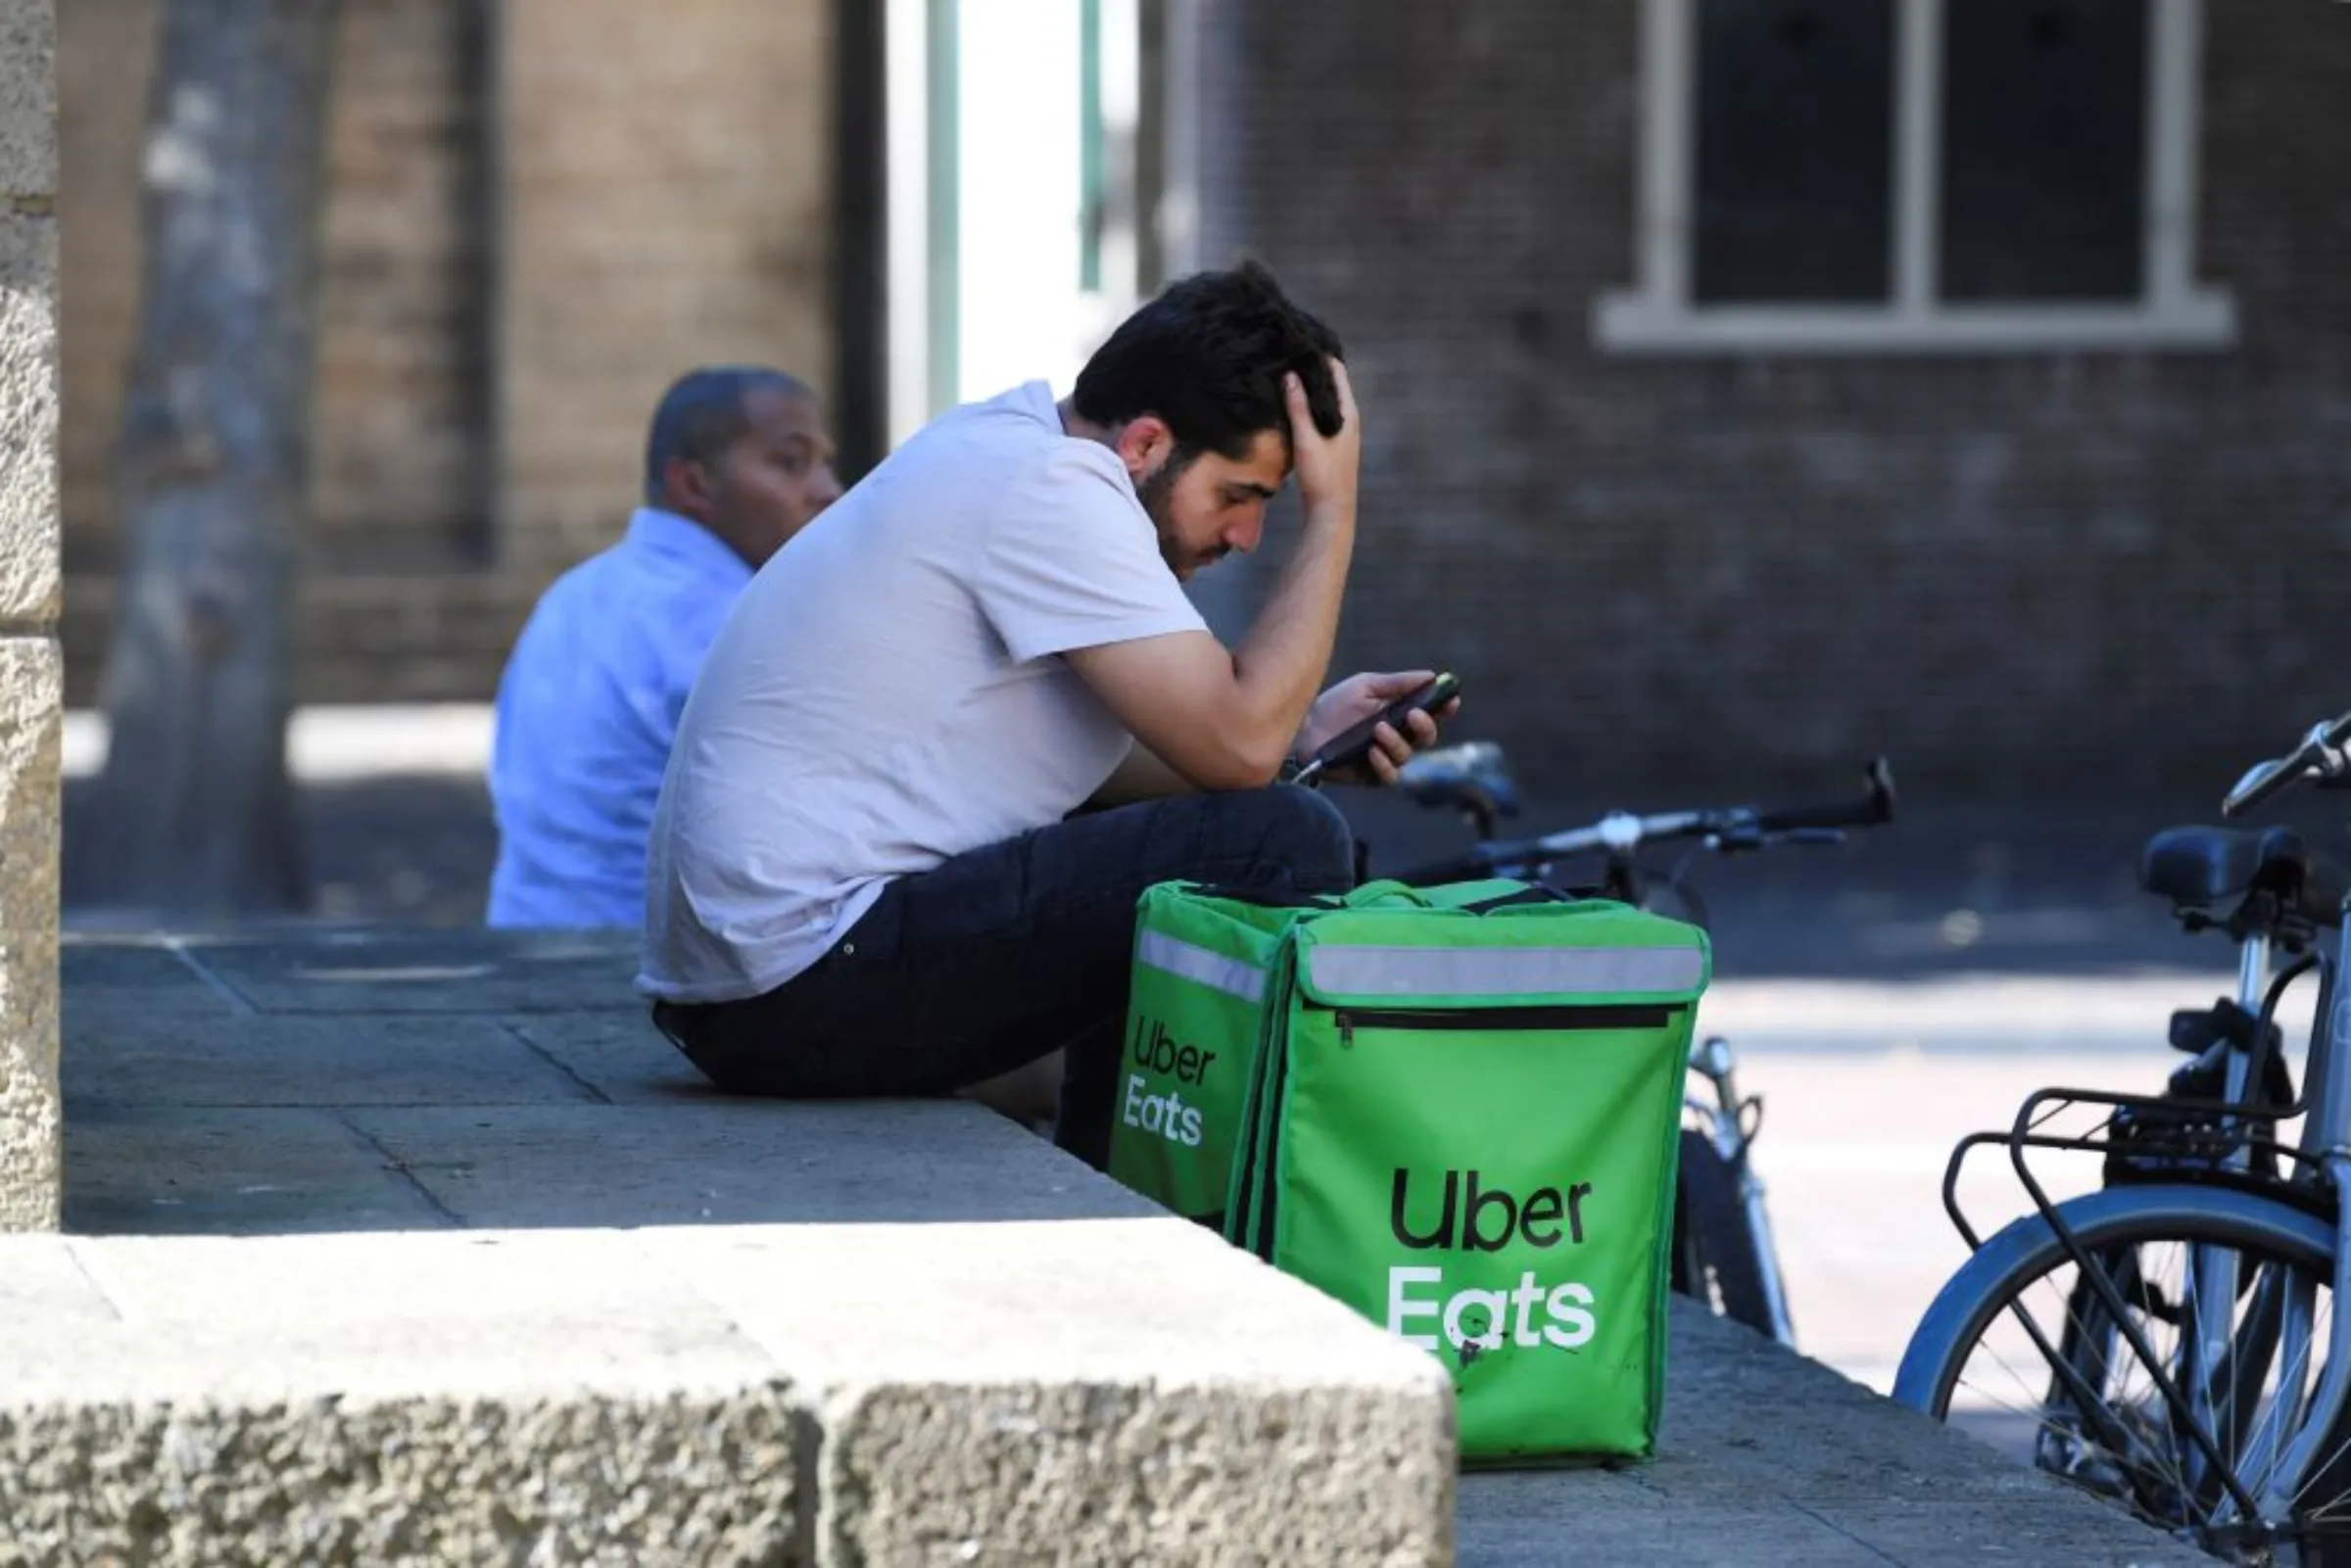 A bicycle courier from Uber Eats checks his phone in the shade during the heatwave in Utrecht , Netherlands August 10, 2022. REUTERS/Piroschka van de Wouw